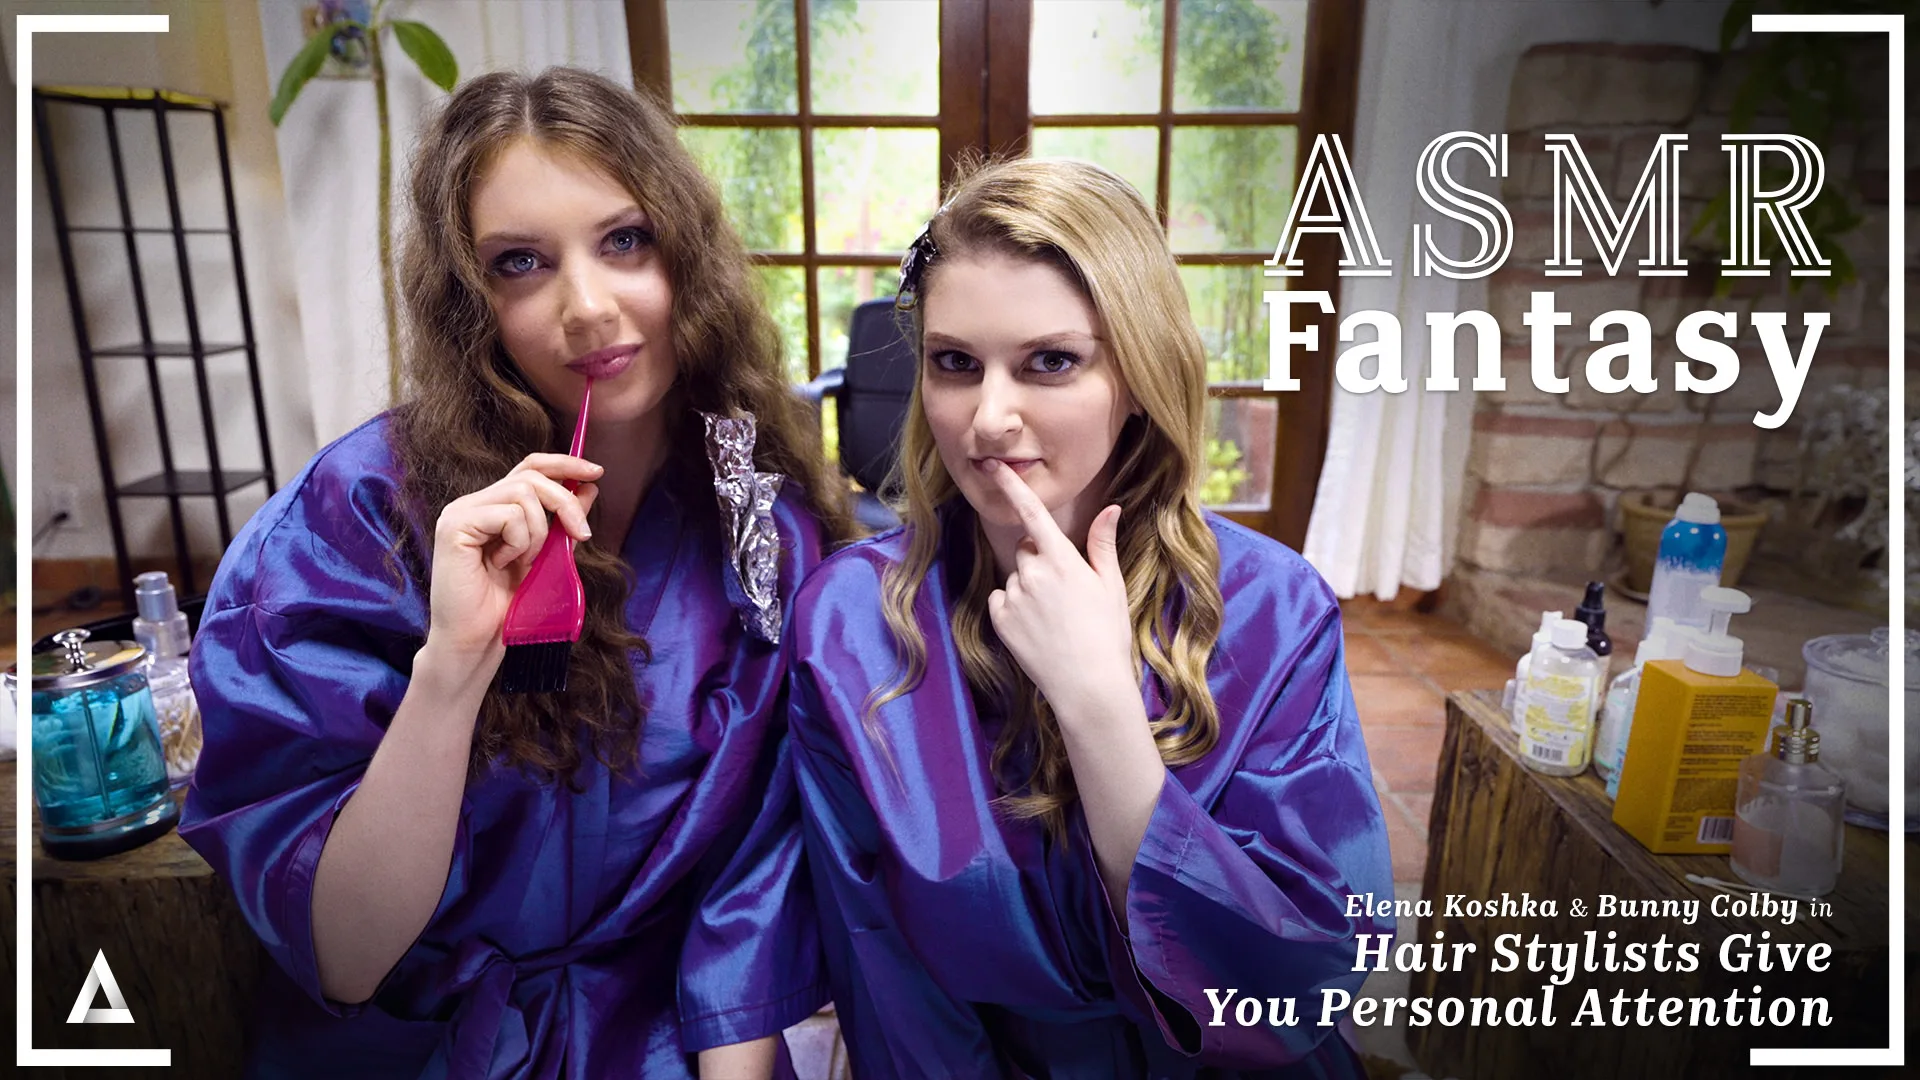 Hair Stylists Give You Personal Attention, Scene #01 - ASMR Fantasy